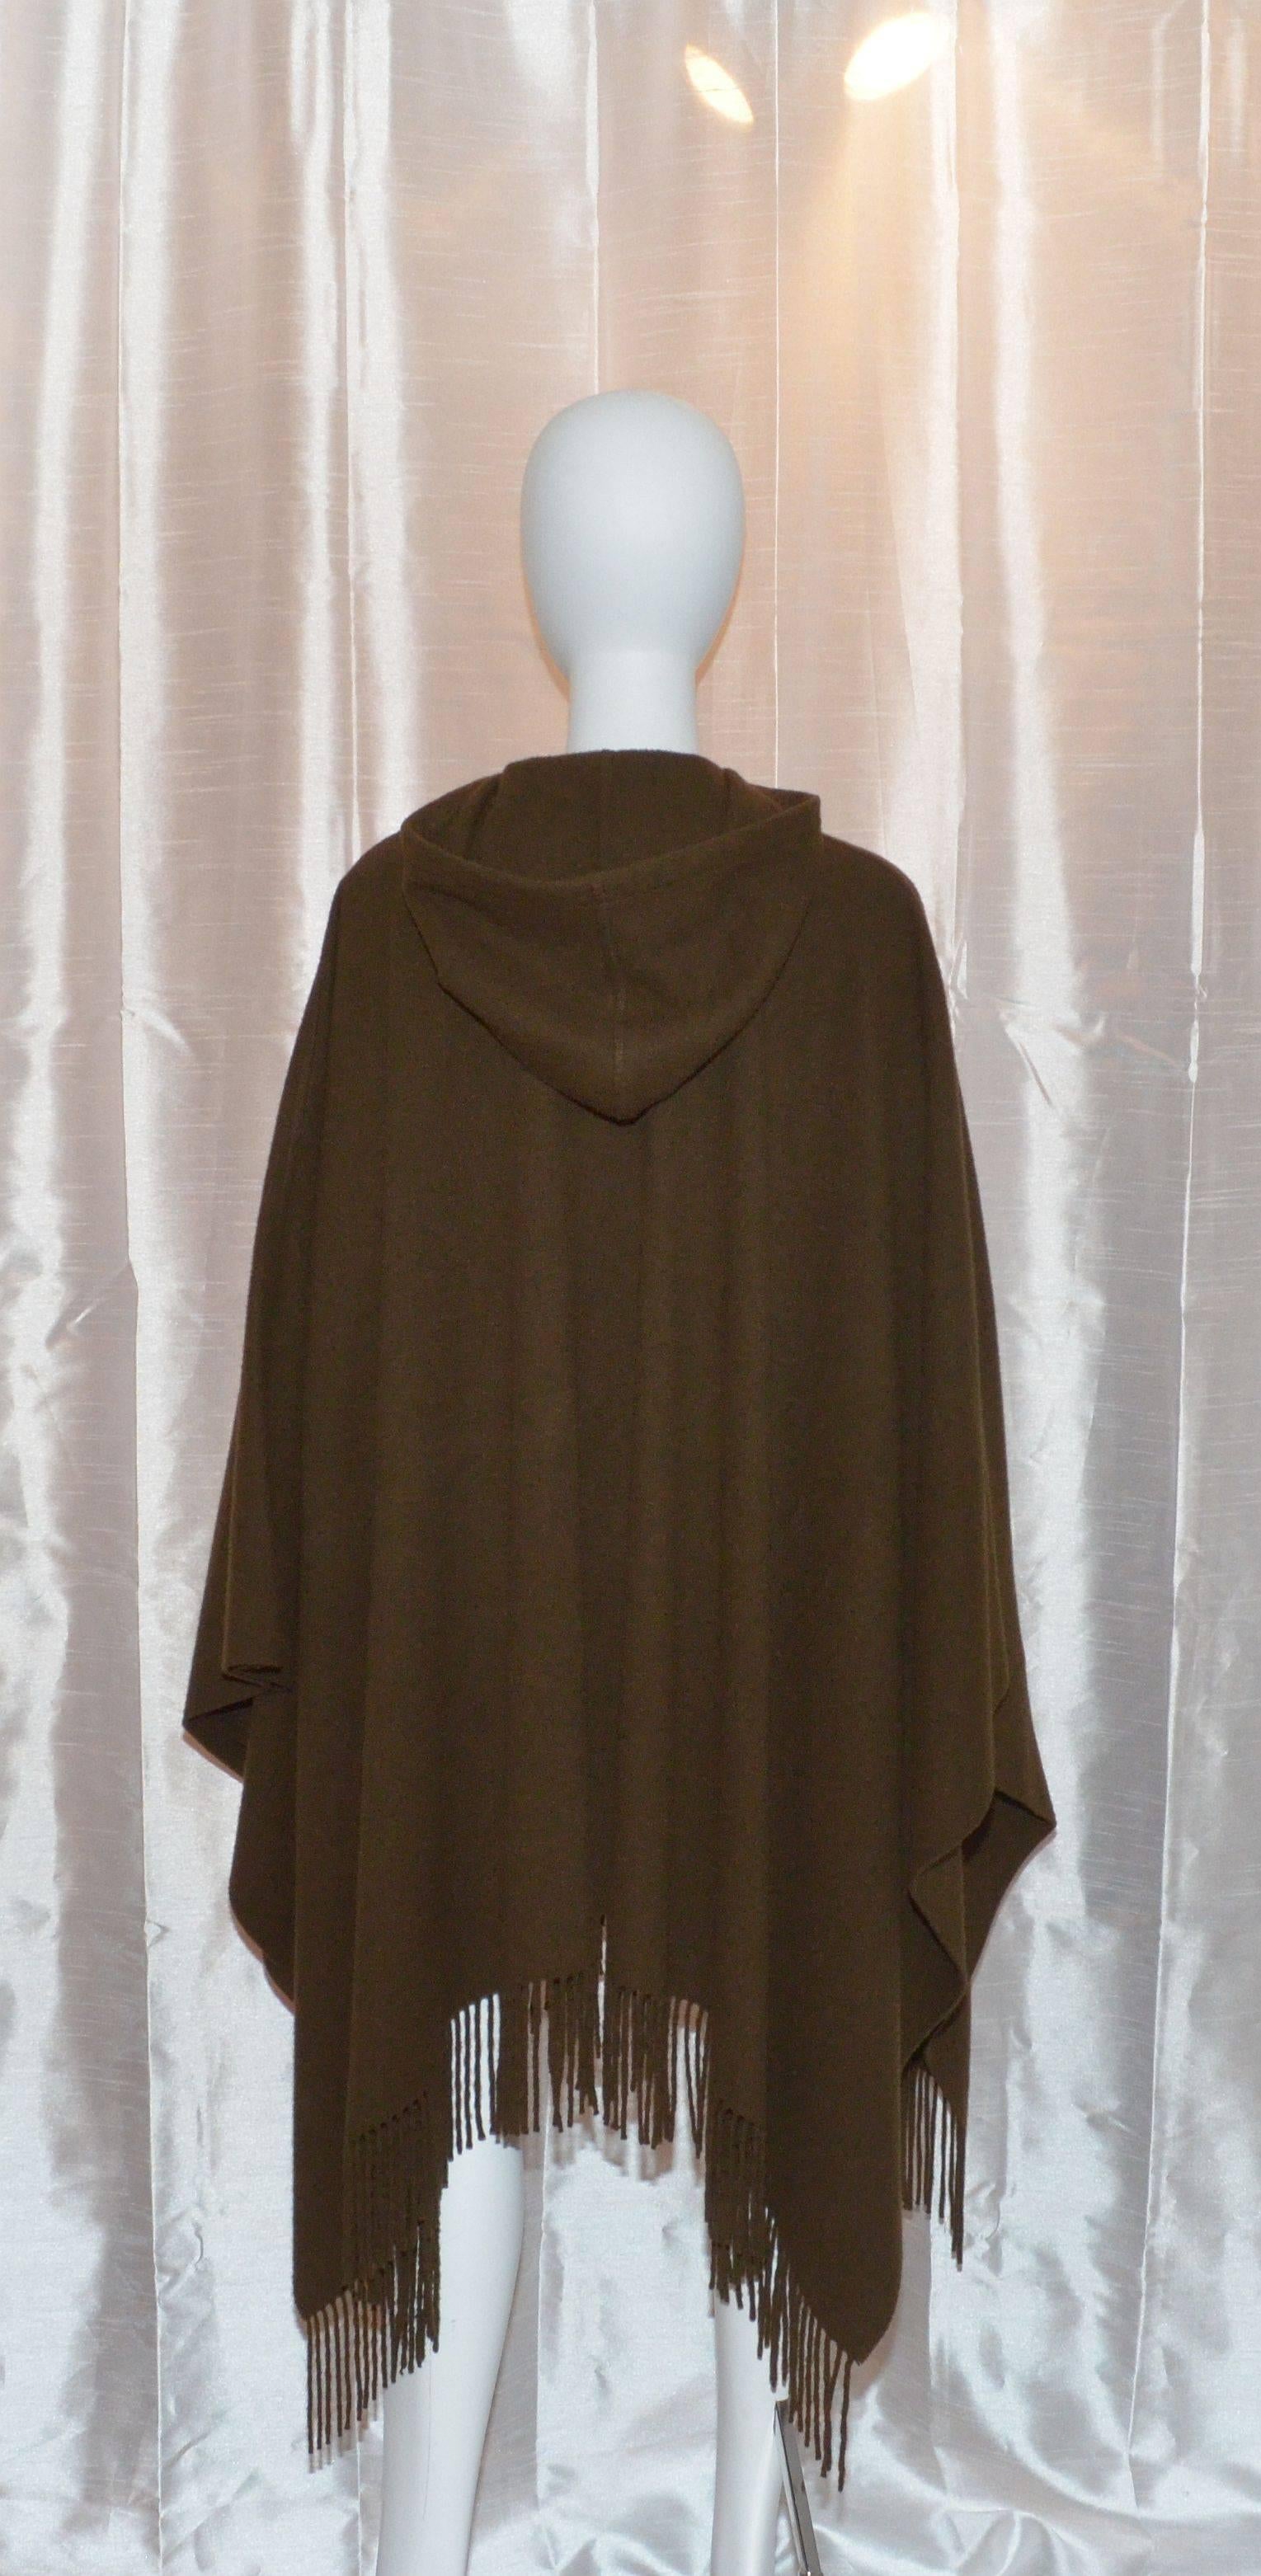 Hermes cape  / poncho features a chunky removable brass hook-and-eye closure at the neck, two large slip pockets, and is hooded. Cape also has a leather/cashmere optional waist tie and a fringe finish along the hem. Made in